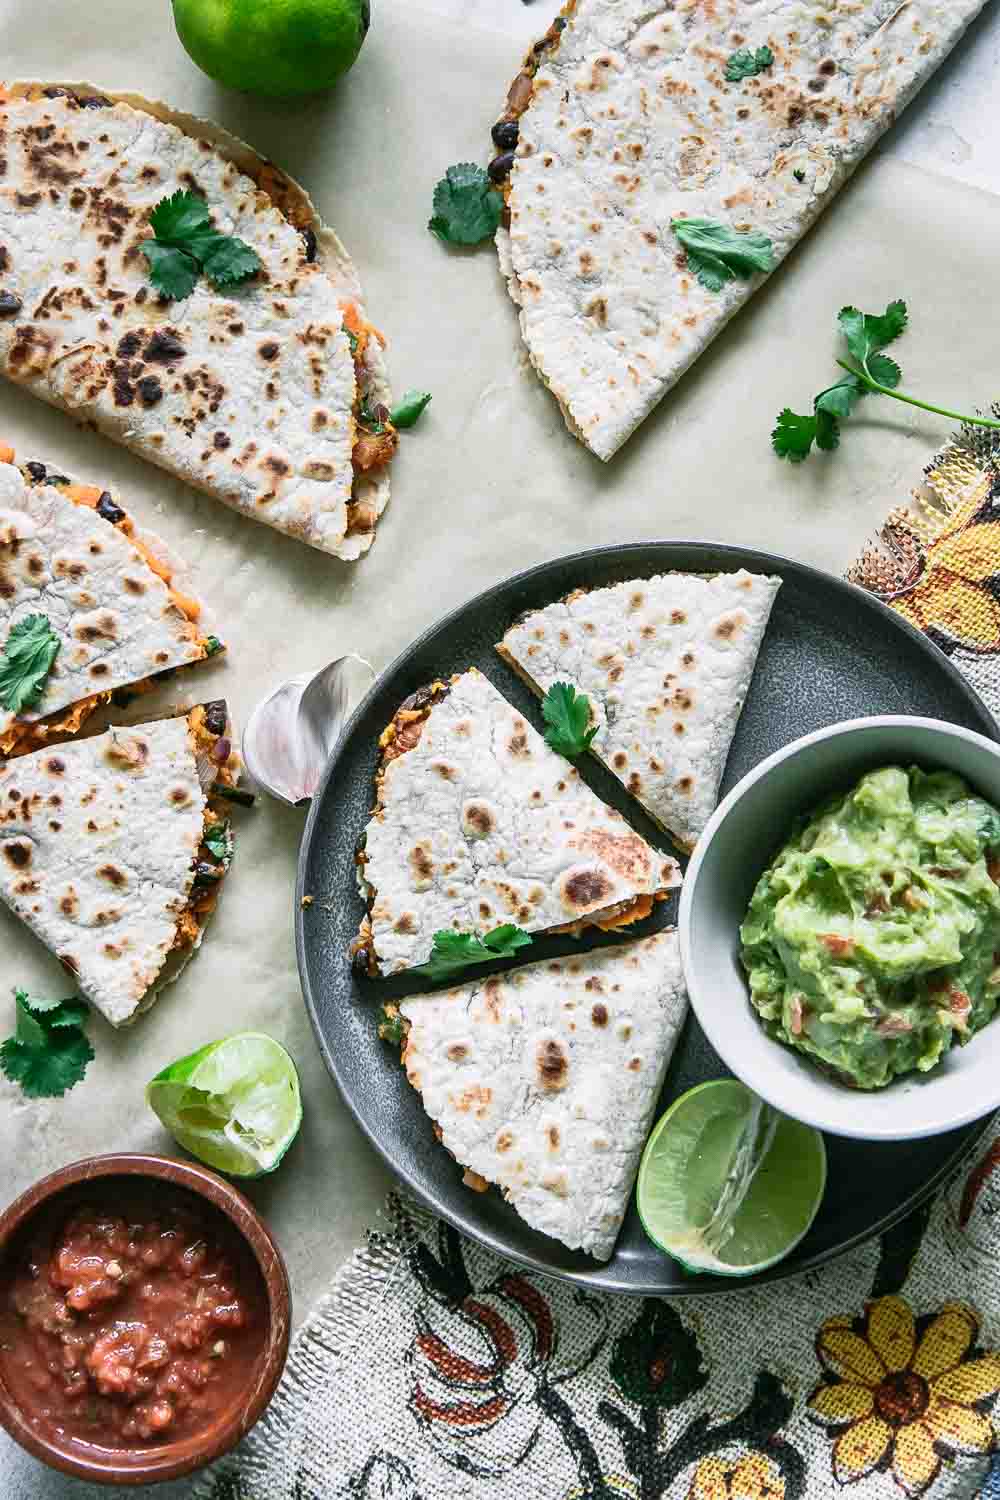 three quesadillas made of sweet potatoes on a plate and a table with a lime and guacamole